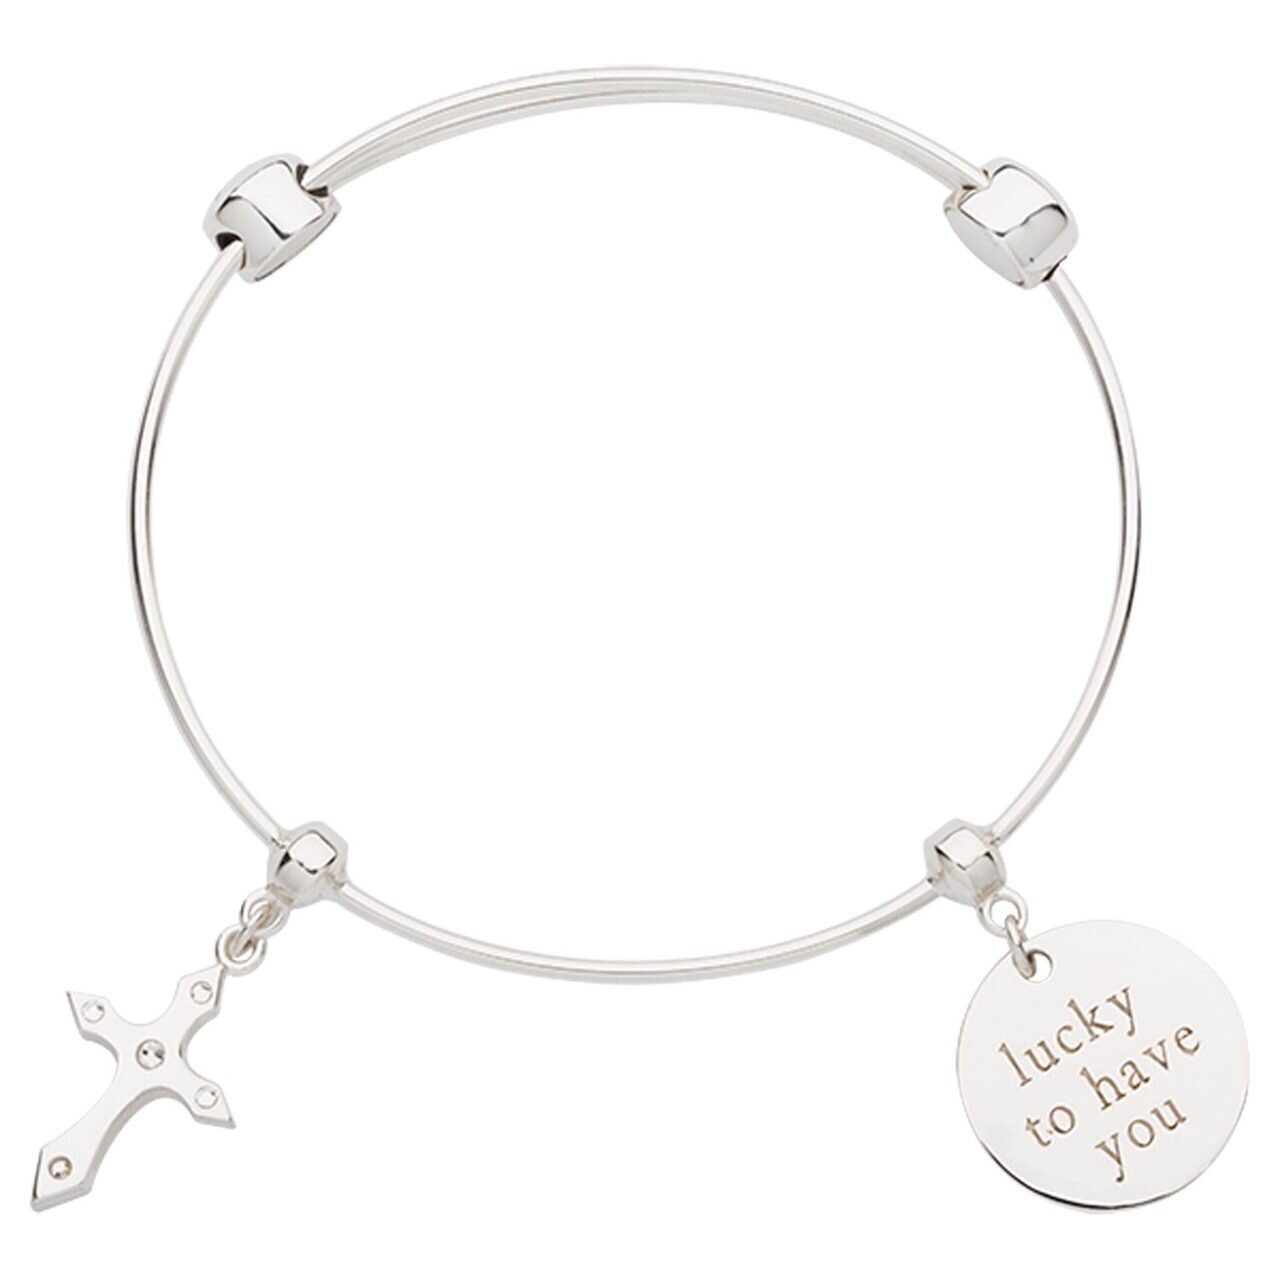 Nikki Lissoni Charm Bangle with Two Fixed Charms Cross Lucky To Have You Silver-plated 19cm B1159S19